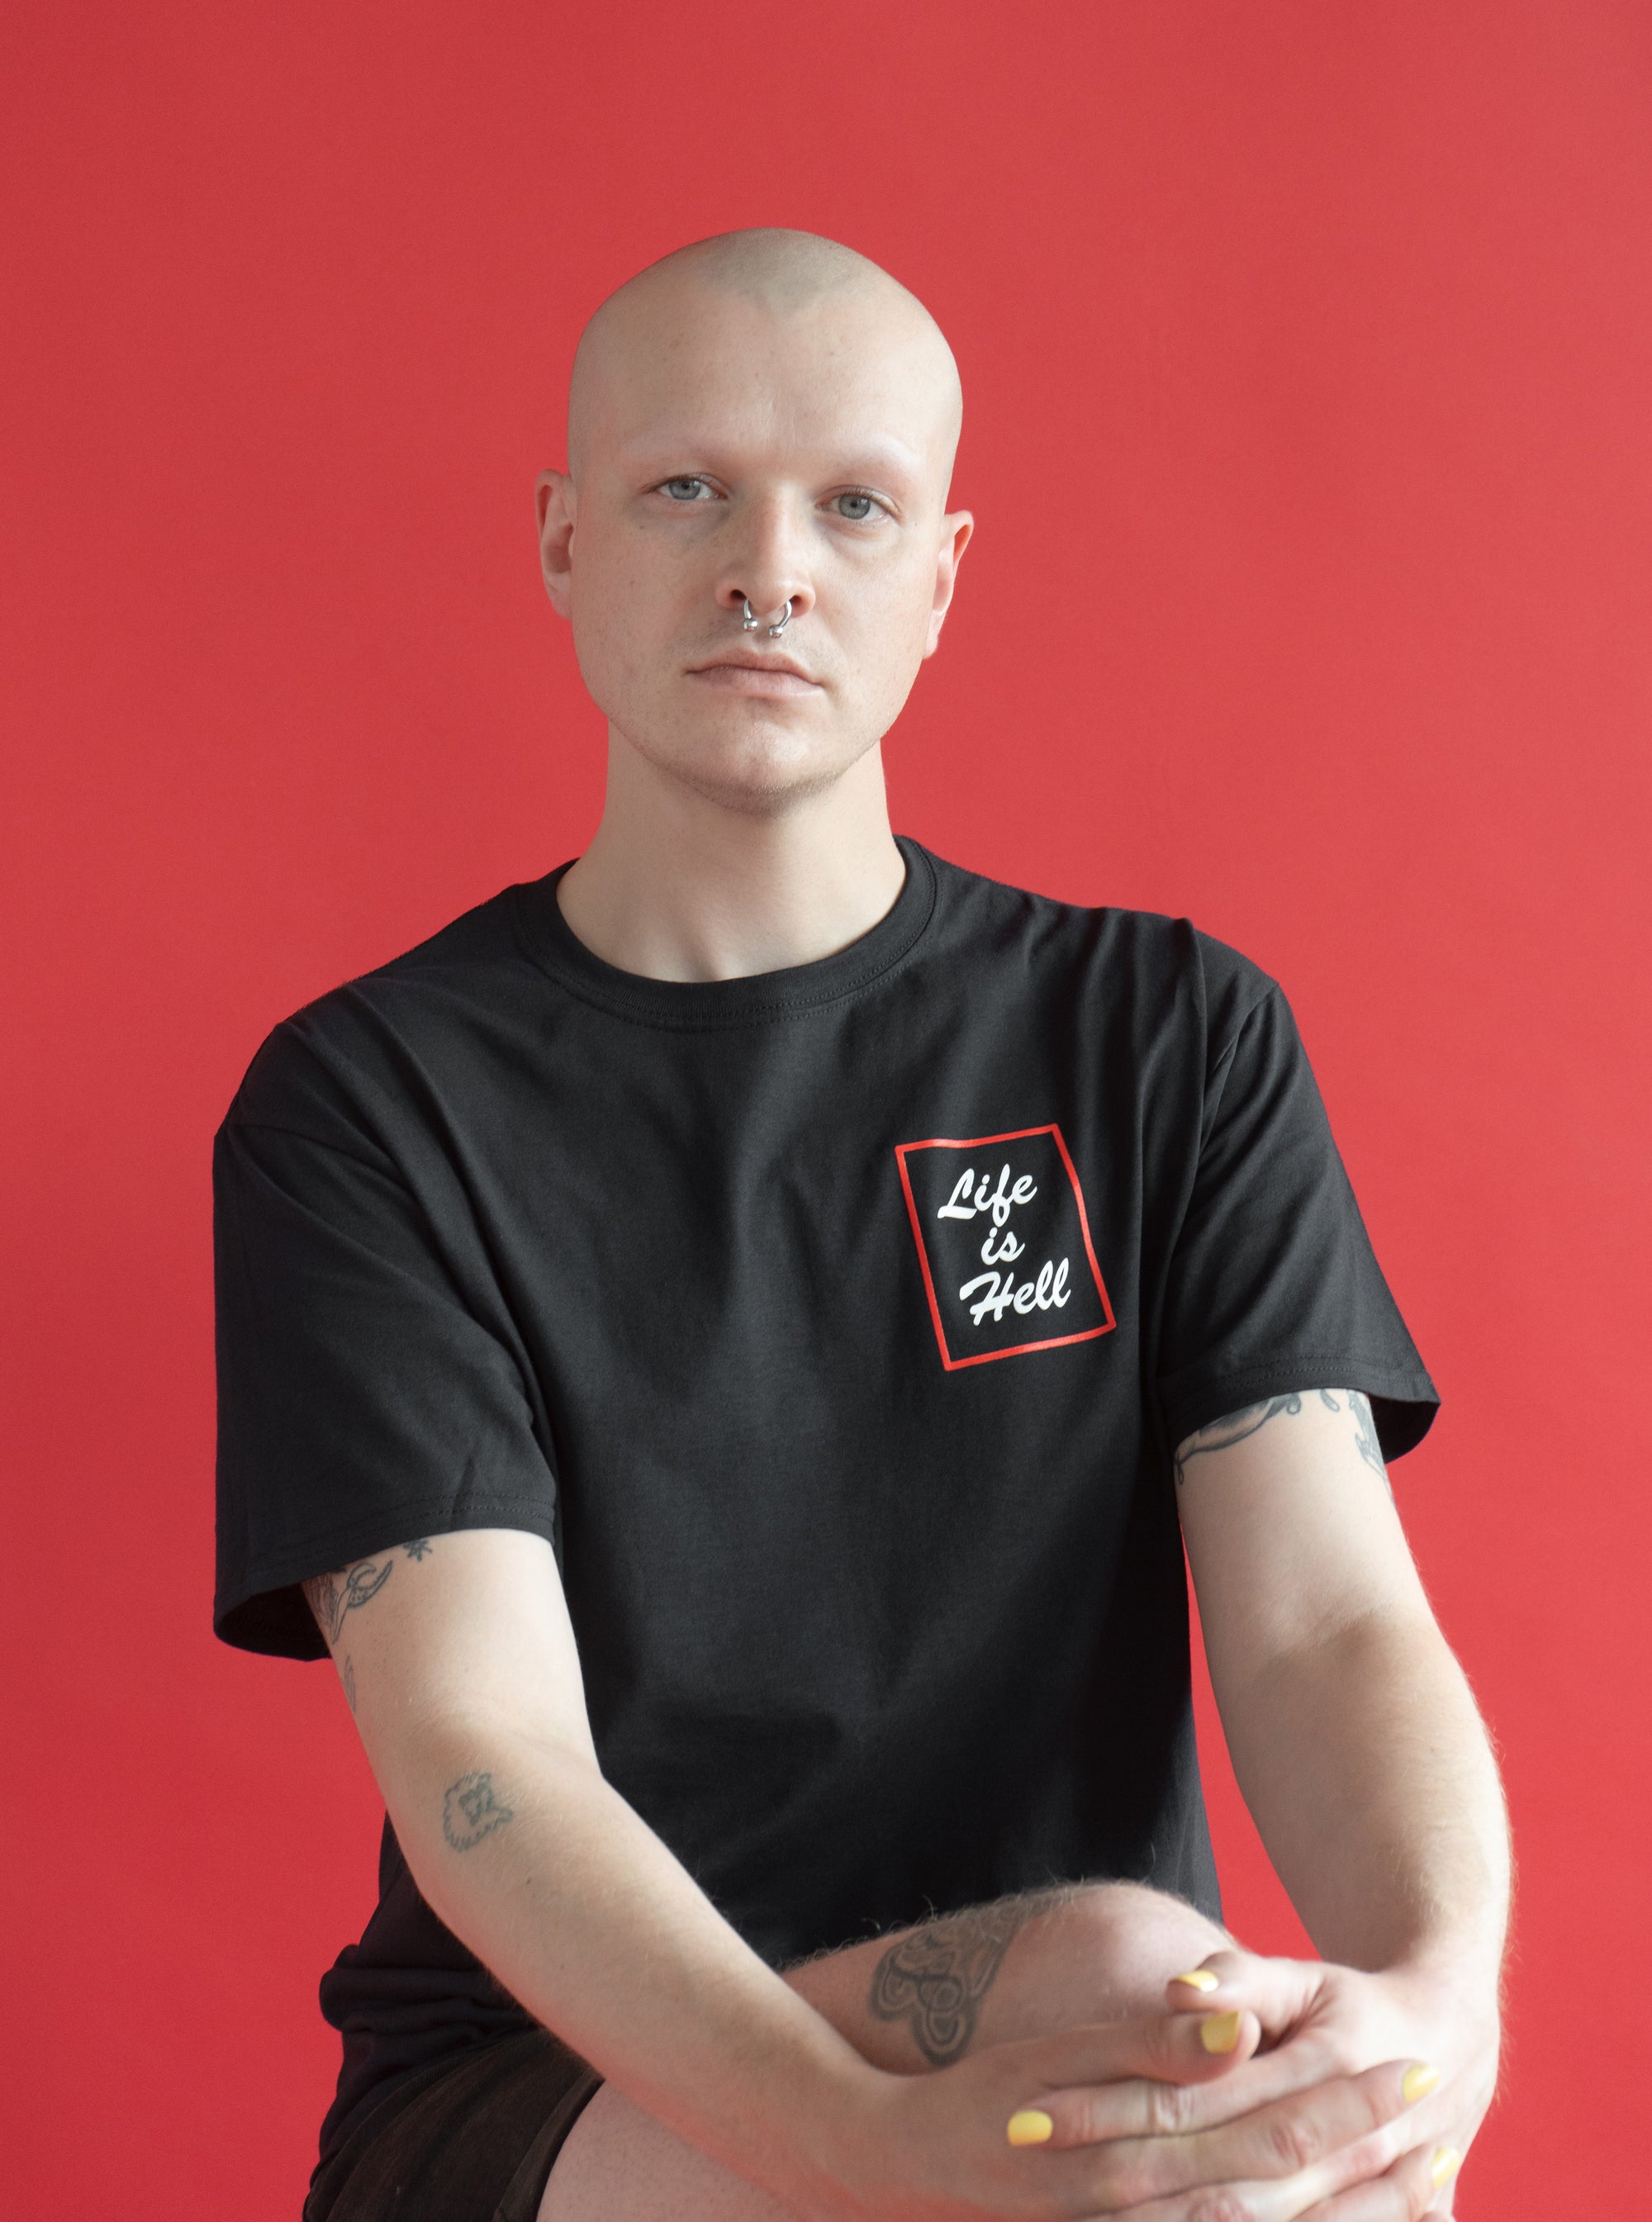 Model wearing the "Life is Hell" T shirt.  They have a shaved head, and are sitting in front of a red background.  